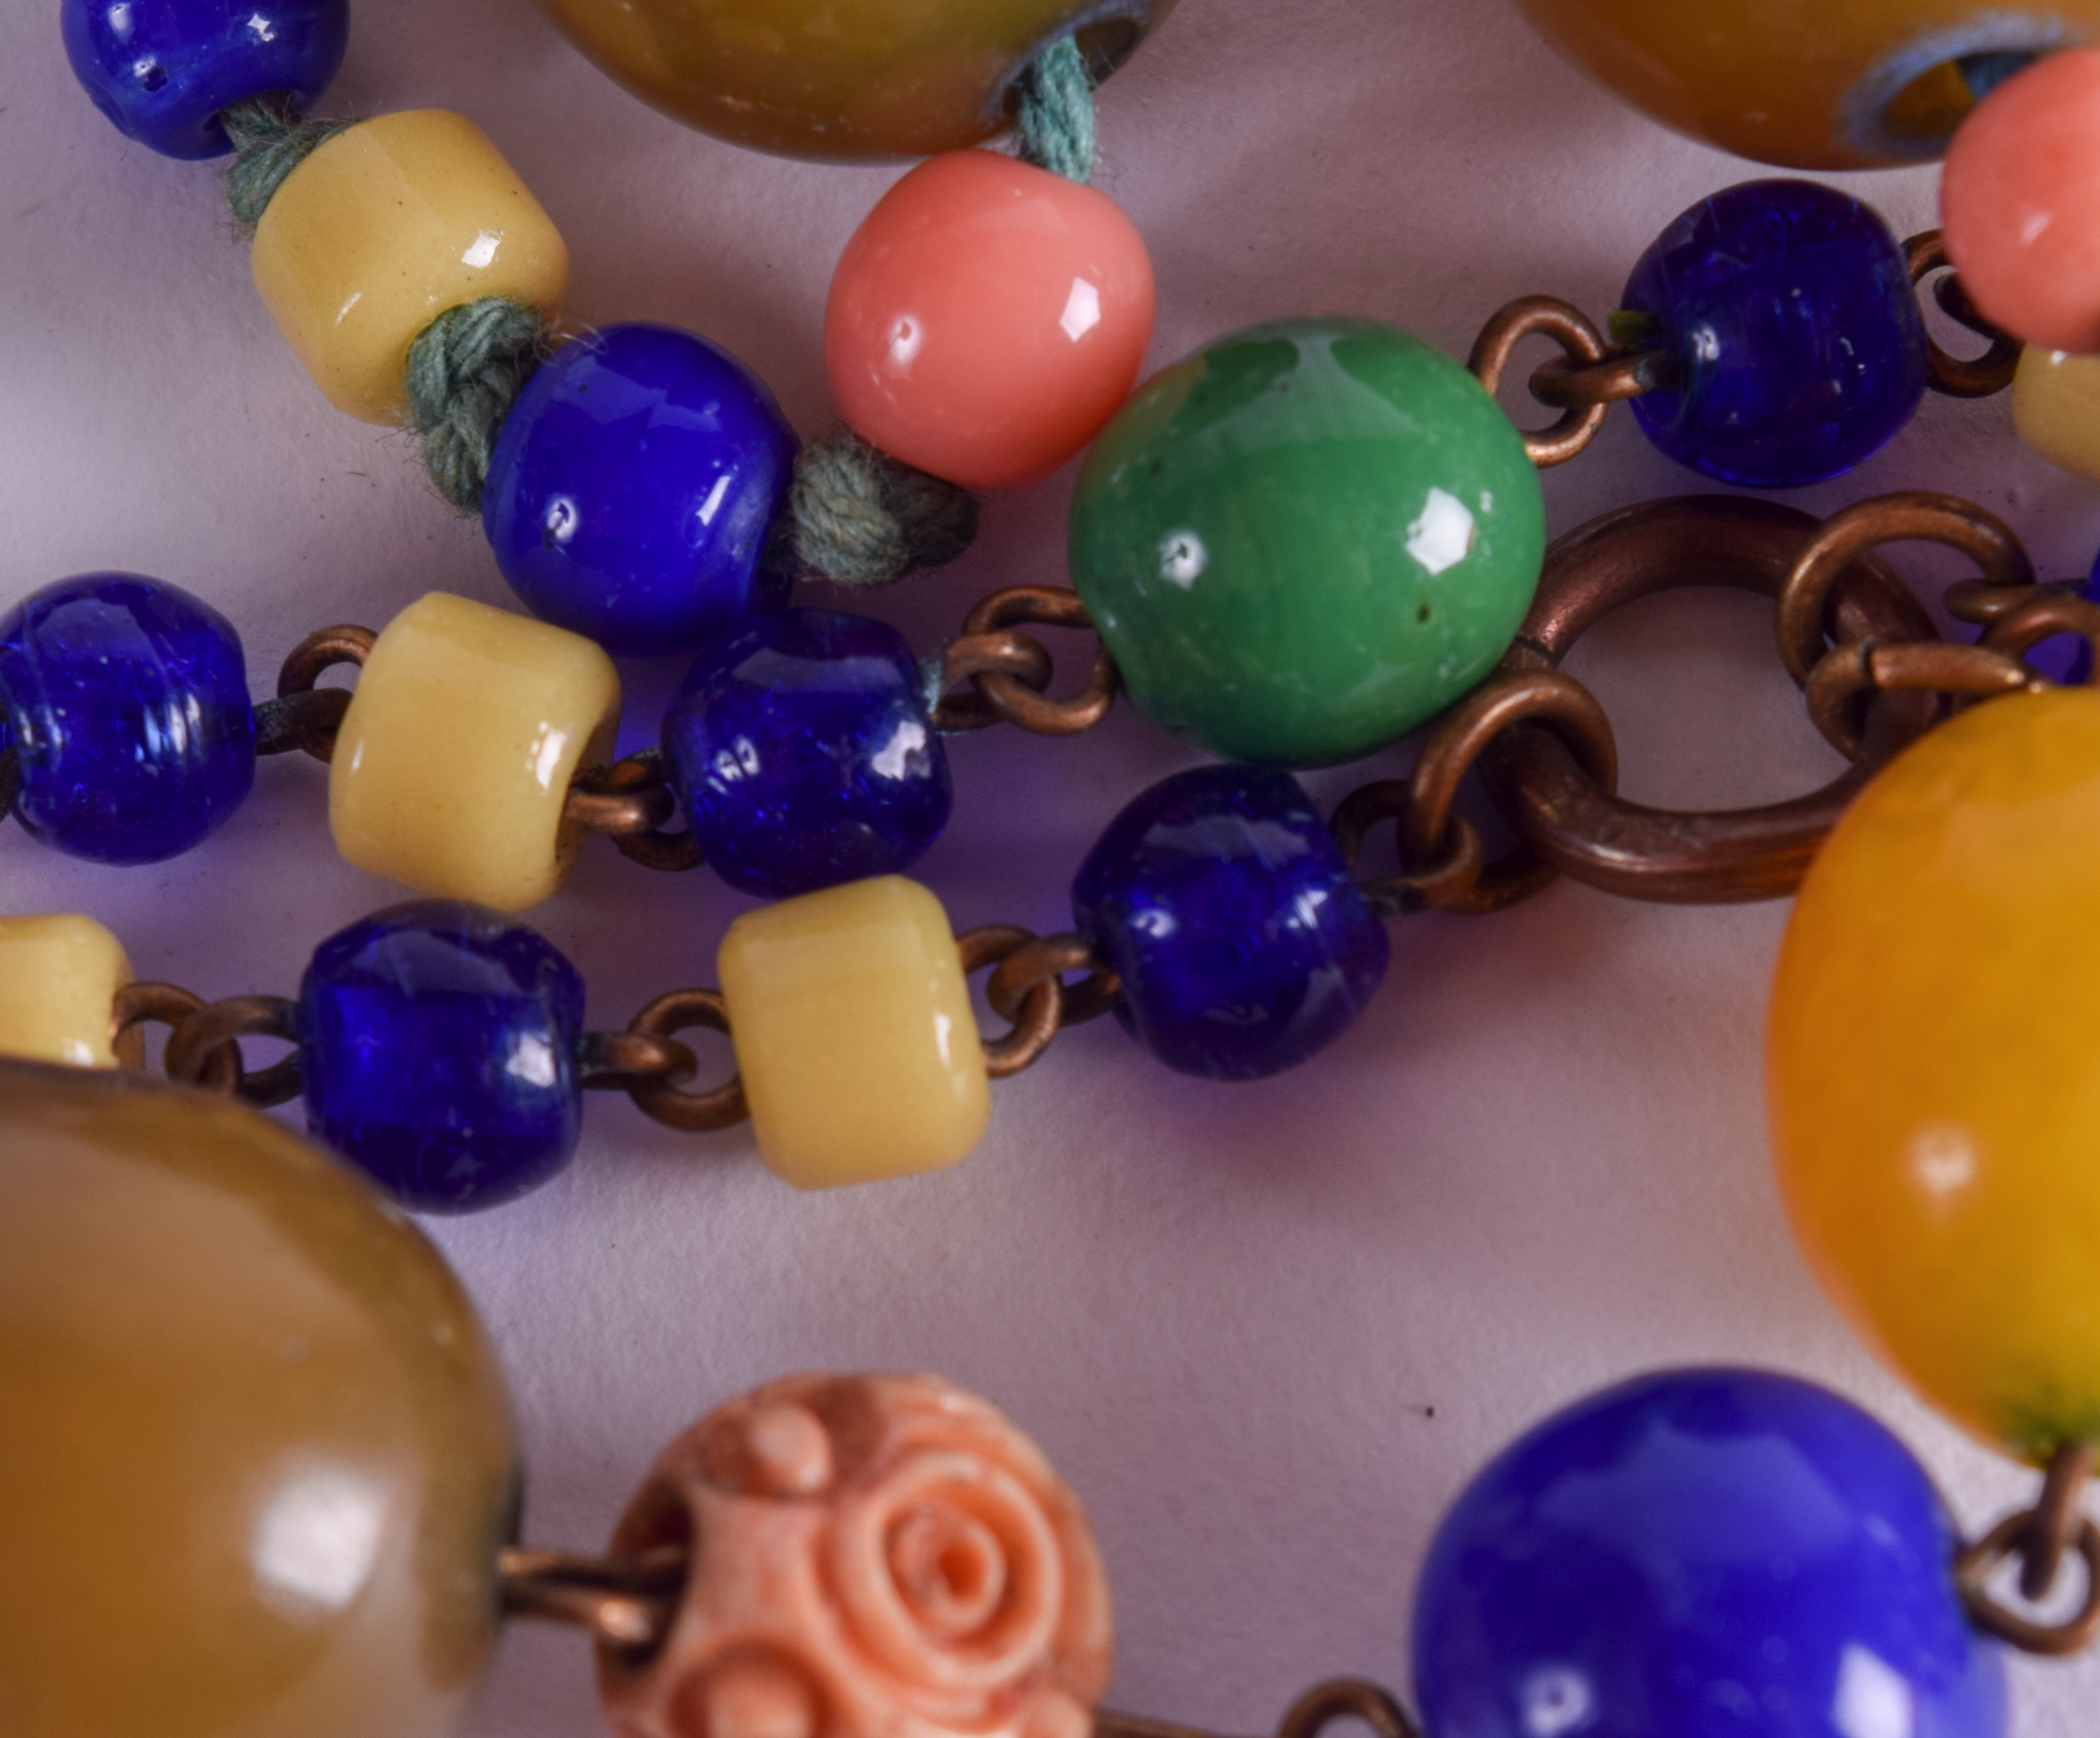 AN EARLY 20TH CENTURY CARVED GLASS IMITATION CORAL AND BAKELITE NECKLACE. 90 cm long. - Image 2 of 2